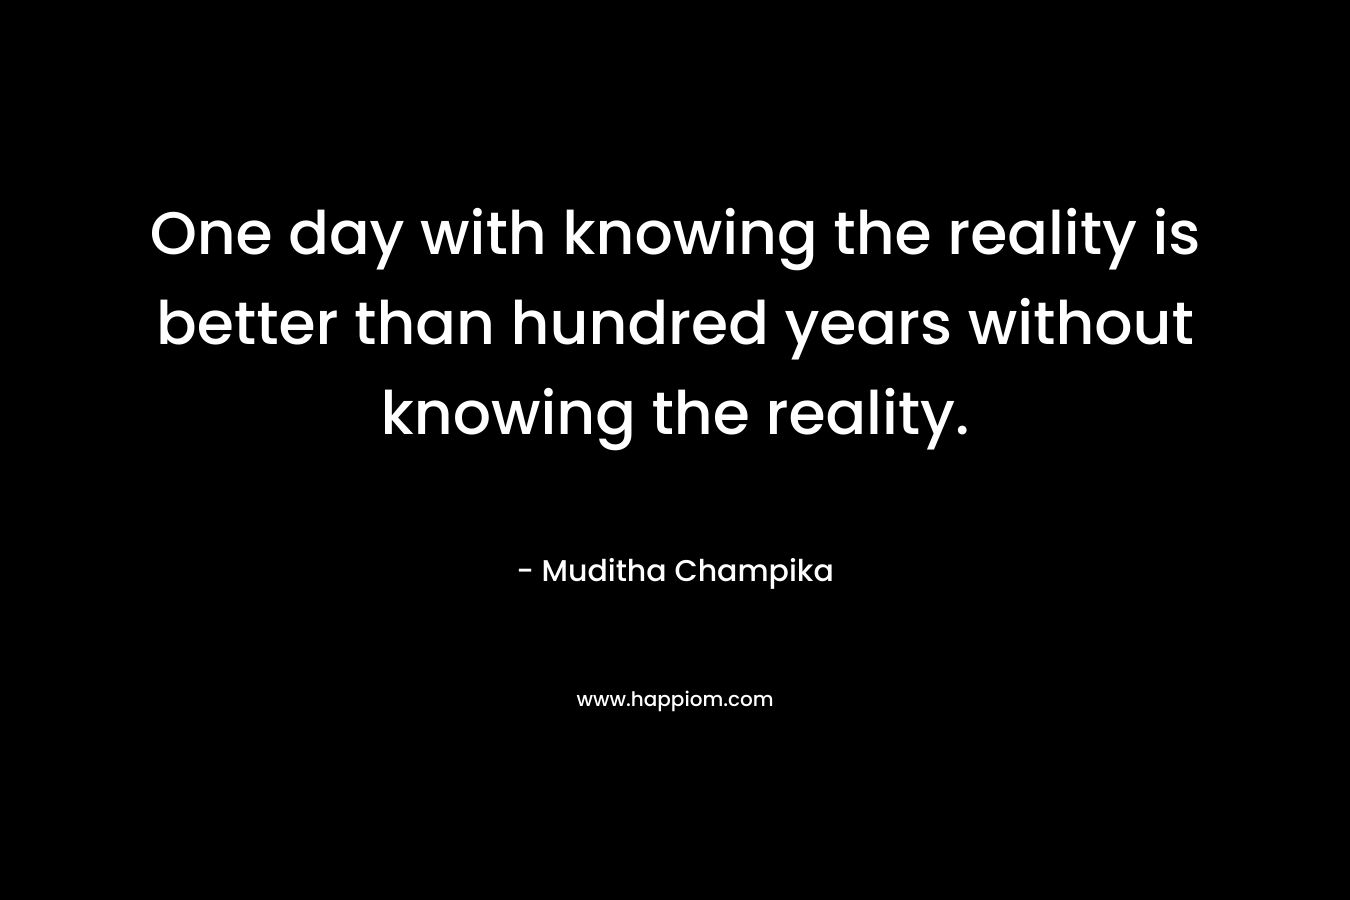 One day with knowing the reality is better than hundred years without knowing the reality.